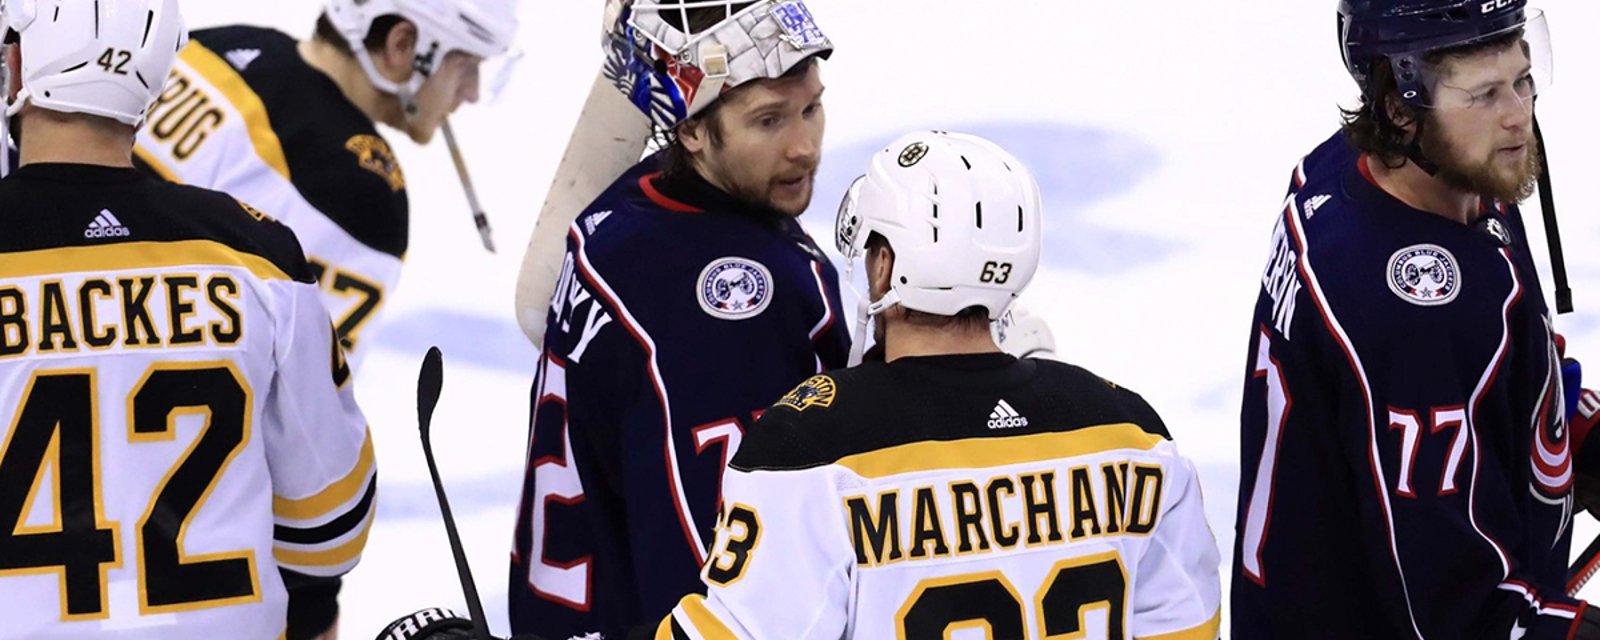 Marchand fires back at former NHLer after getting called out last night